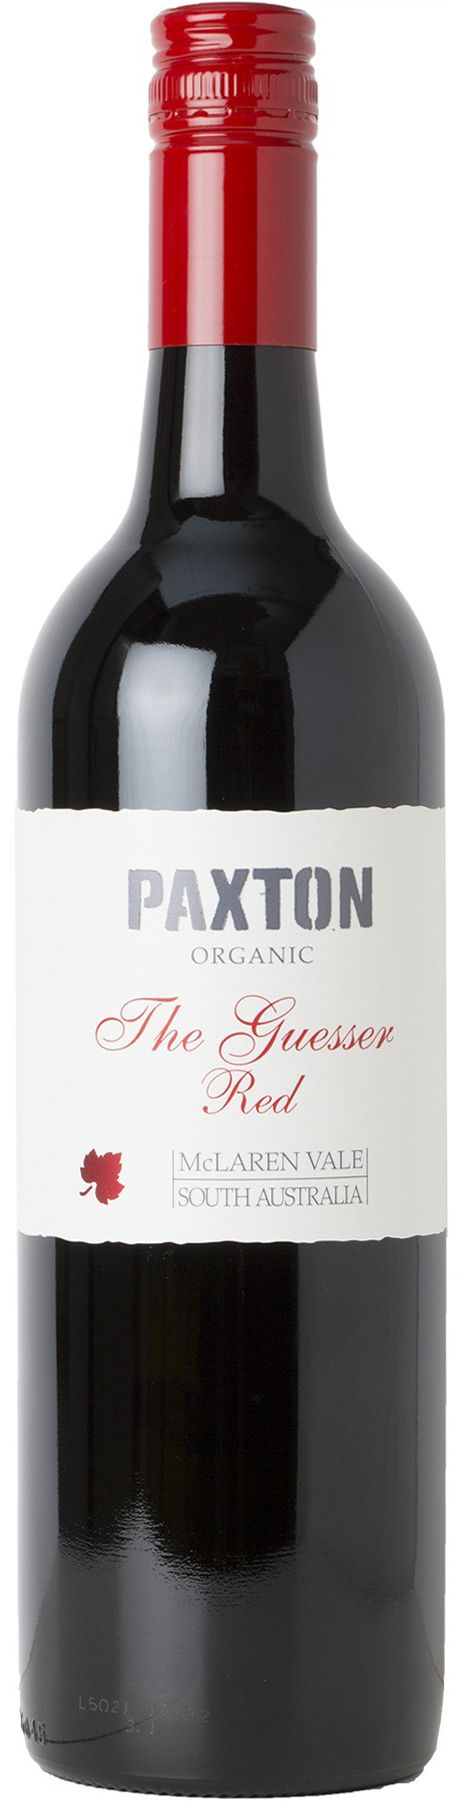 Paxton, The Guesser Organic Red, 2015